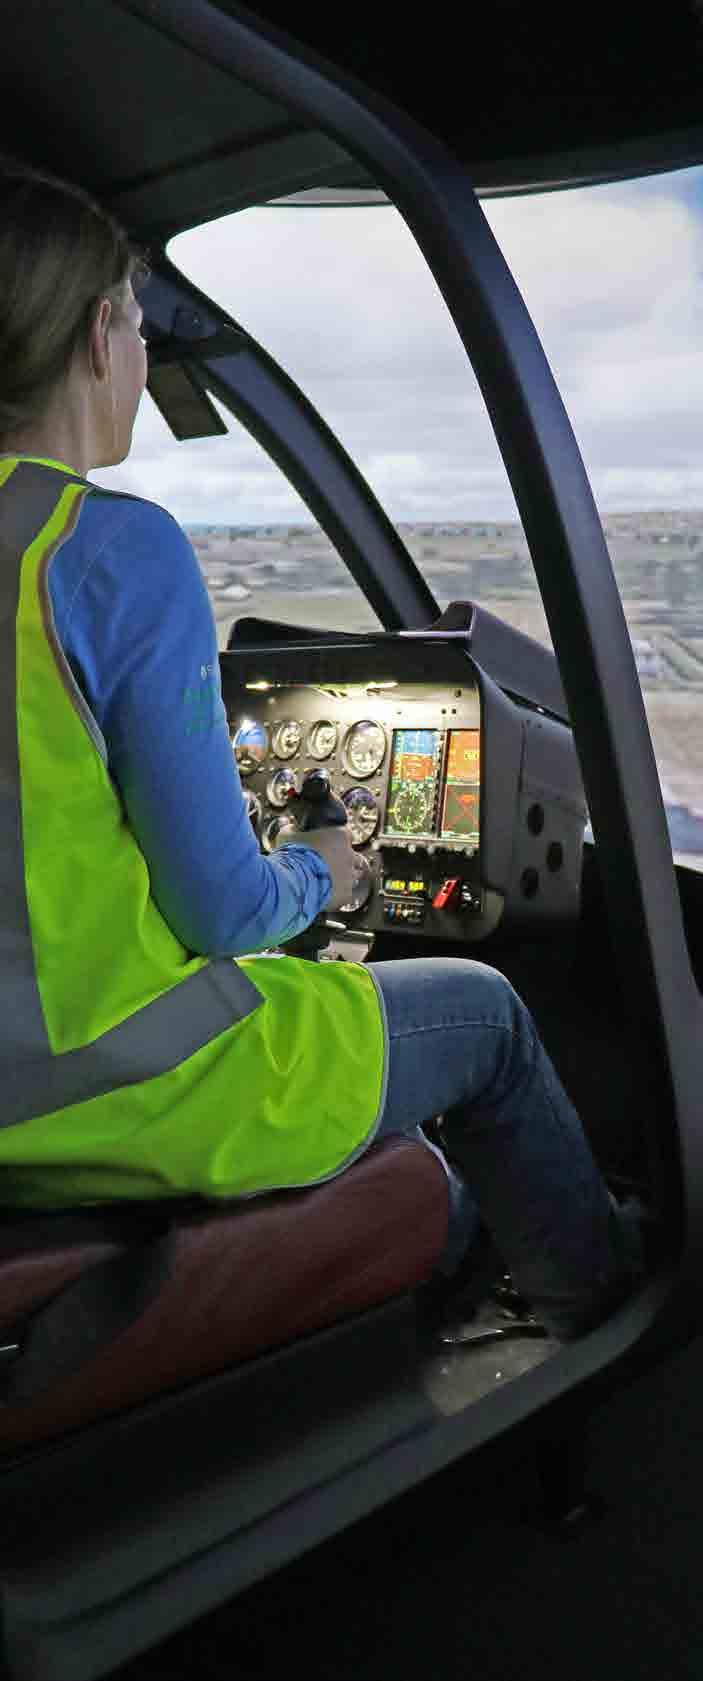 Other scenarios in the CAE 3000 include all types of emergencies, such as engine failure, hydraulic system failure, tailrotor problems, and even a stuck tailrotor control.